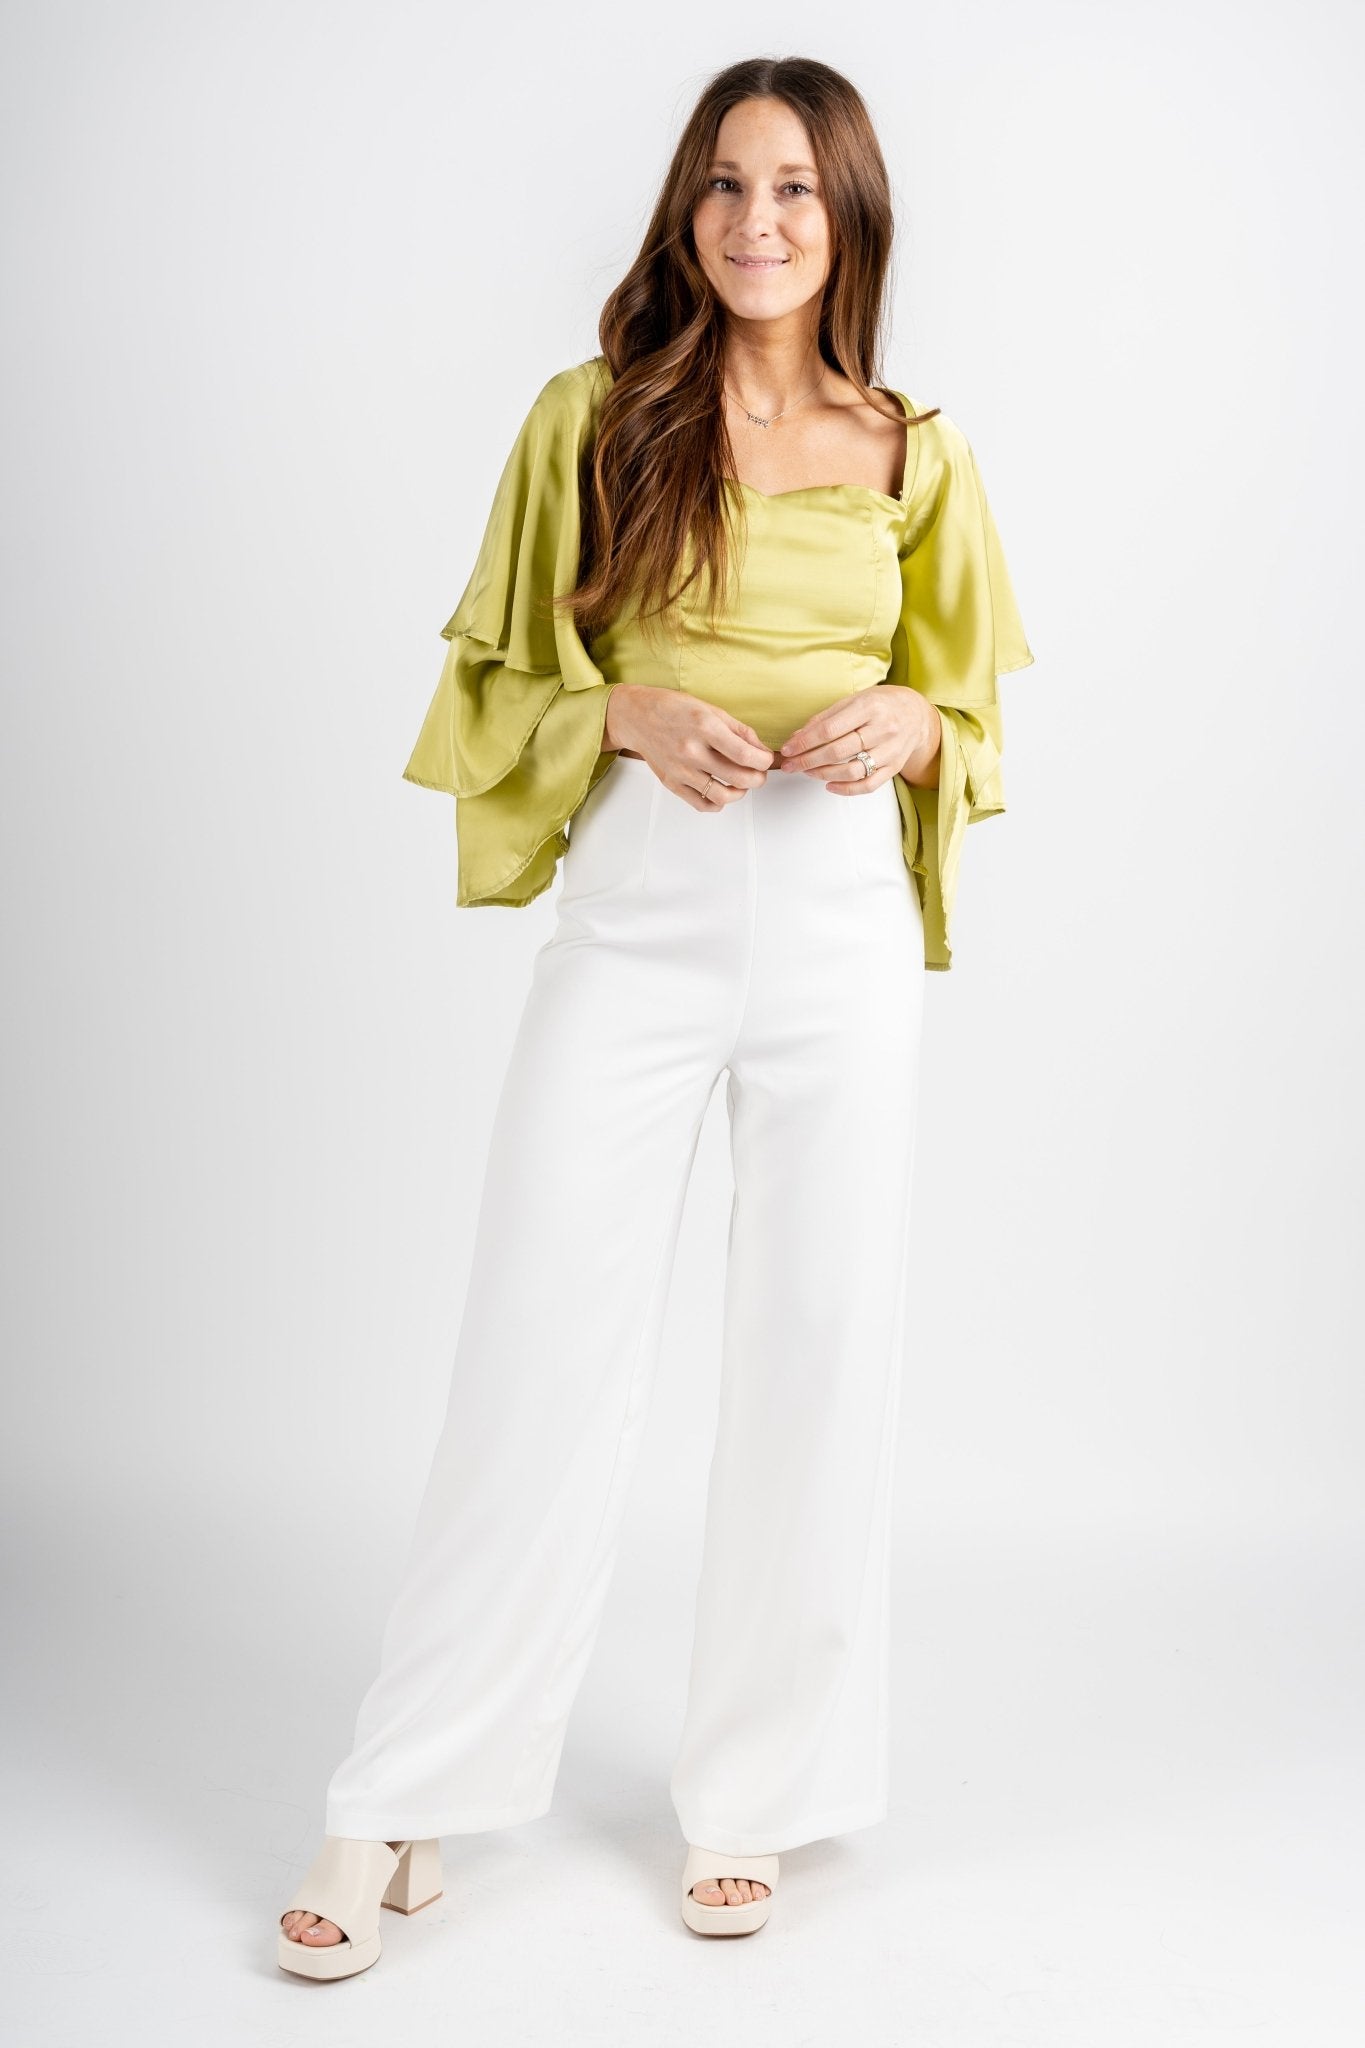 Trumpet sleeve crop top muted lime - Fun Top - Unique Getaway Gear at Lush Fashion Lounge Boutique in Oklahoma